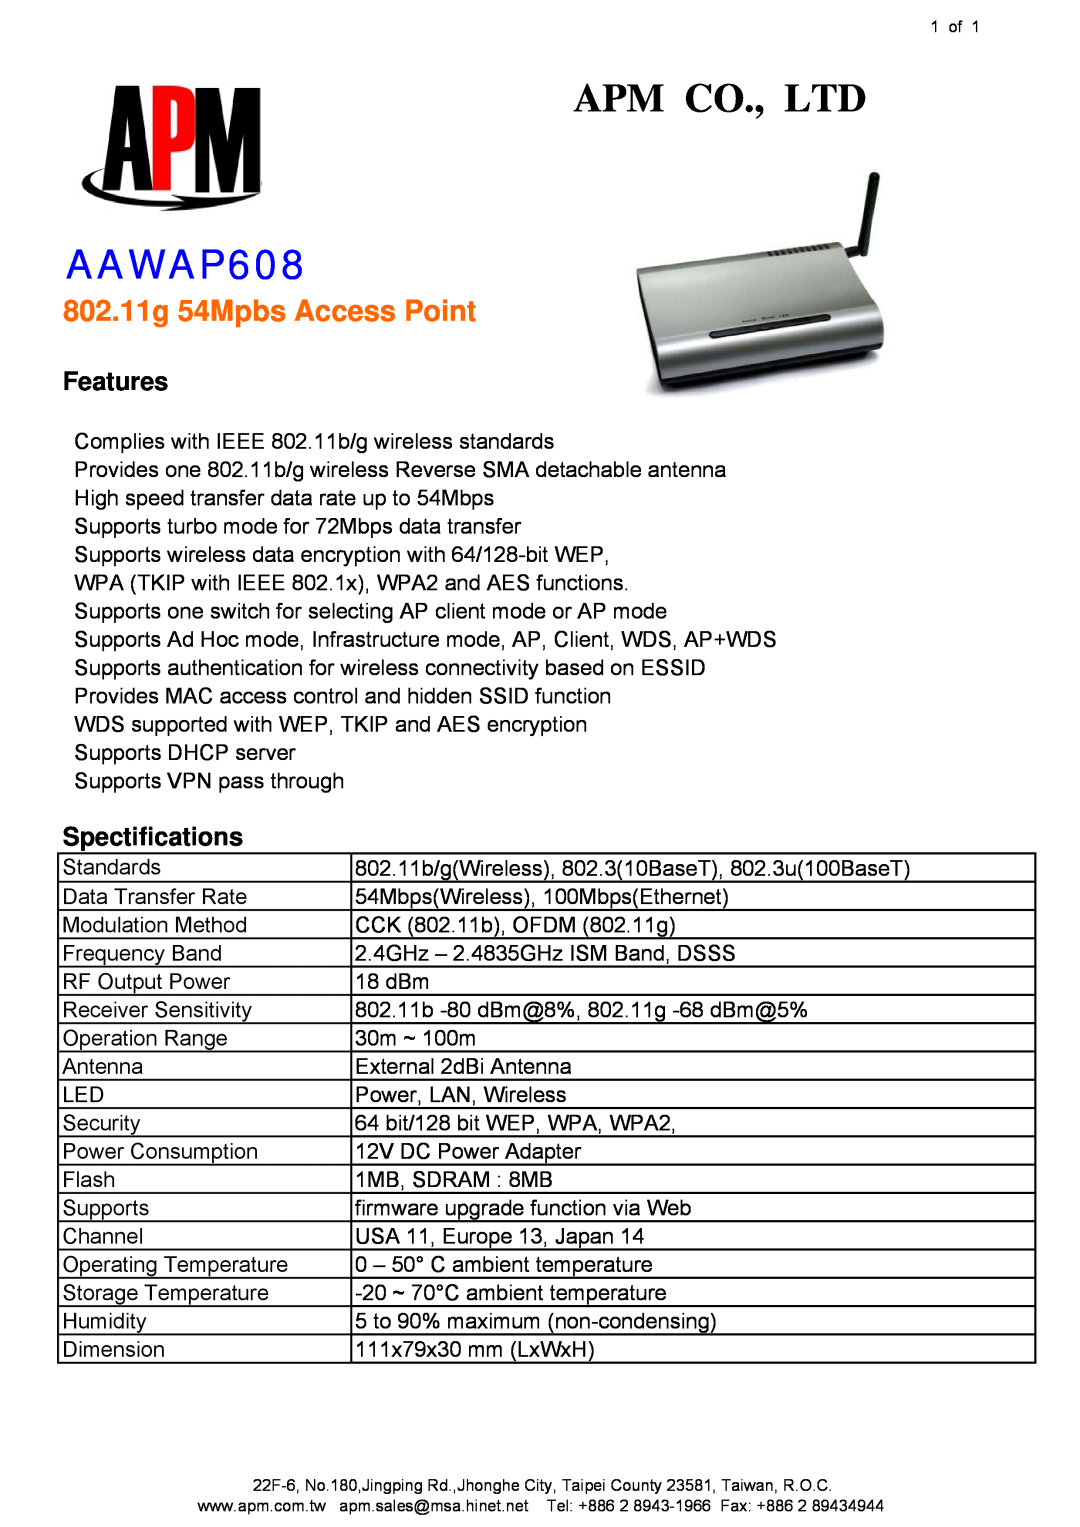 APM AAWAP608 manual 802.11g 54Mpbs Access Point, Features, Spectifications 